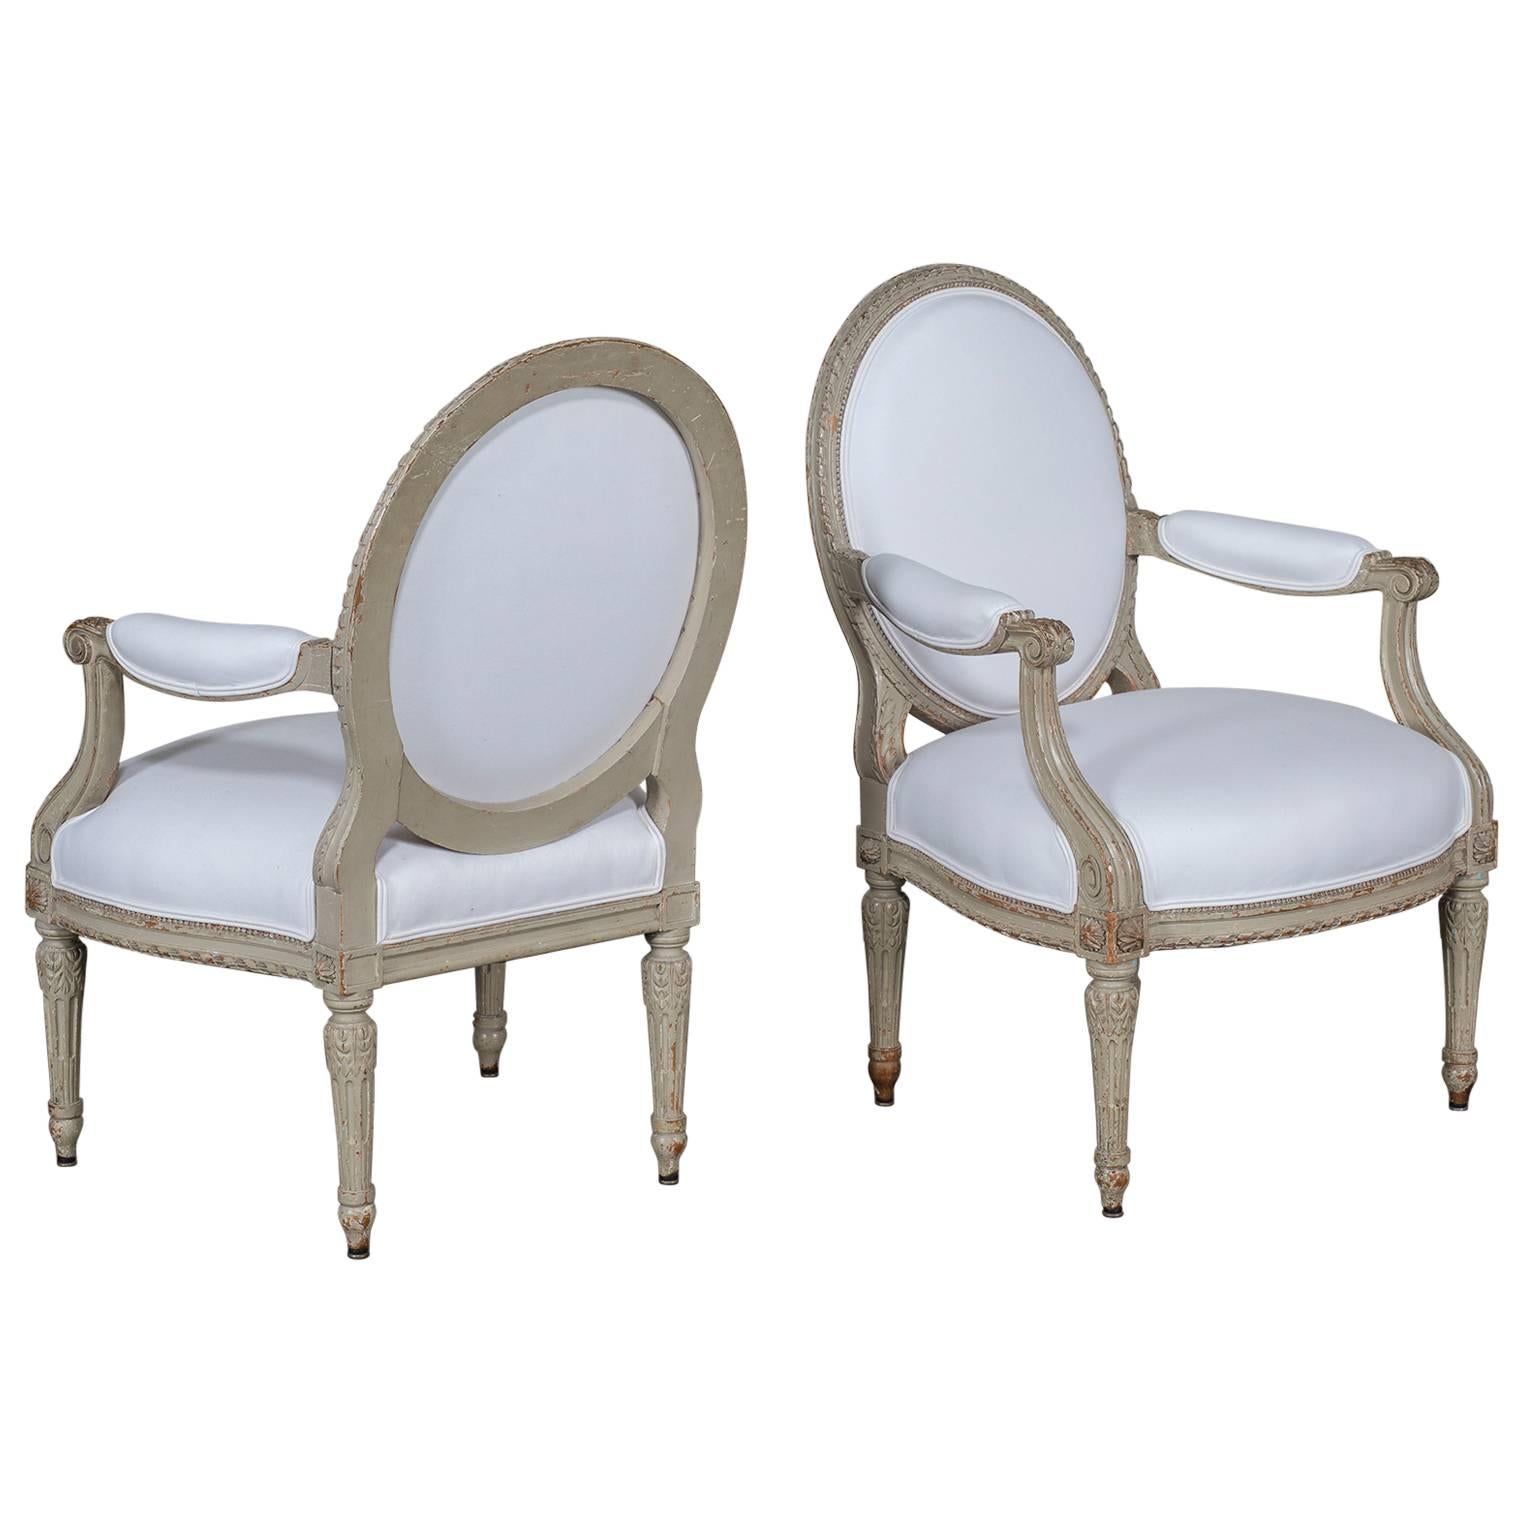 Pair of Antique French Louis XVI Style Painted Armchairs, circa 1880